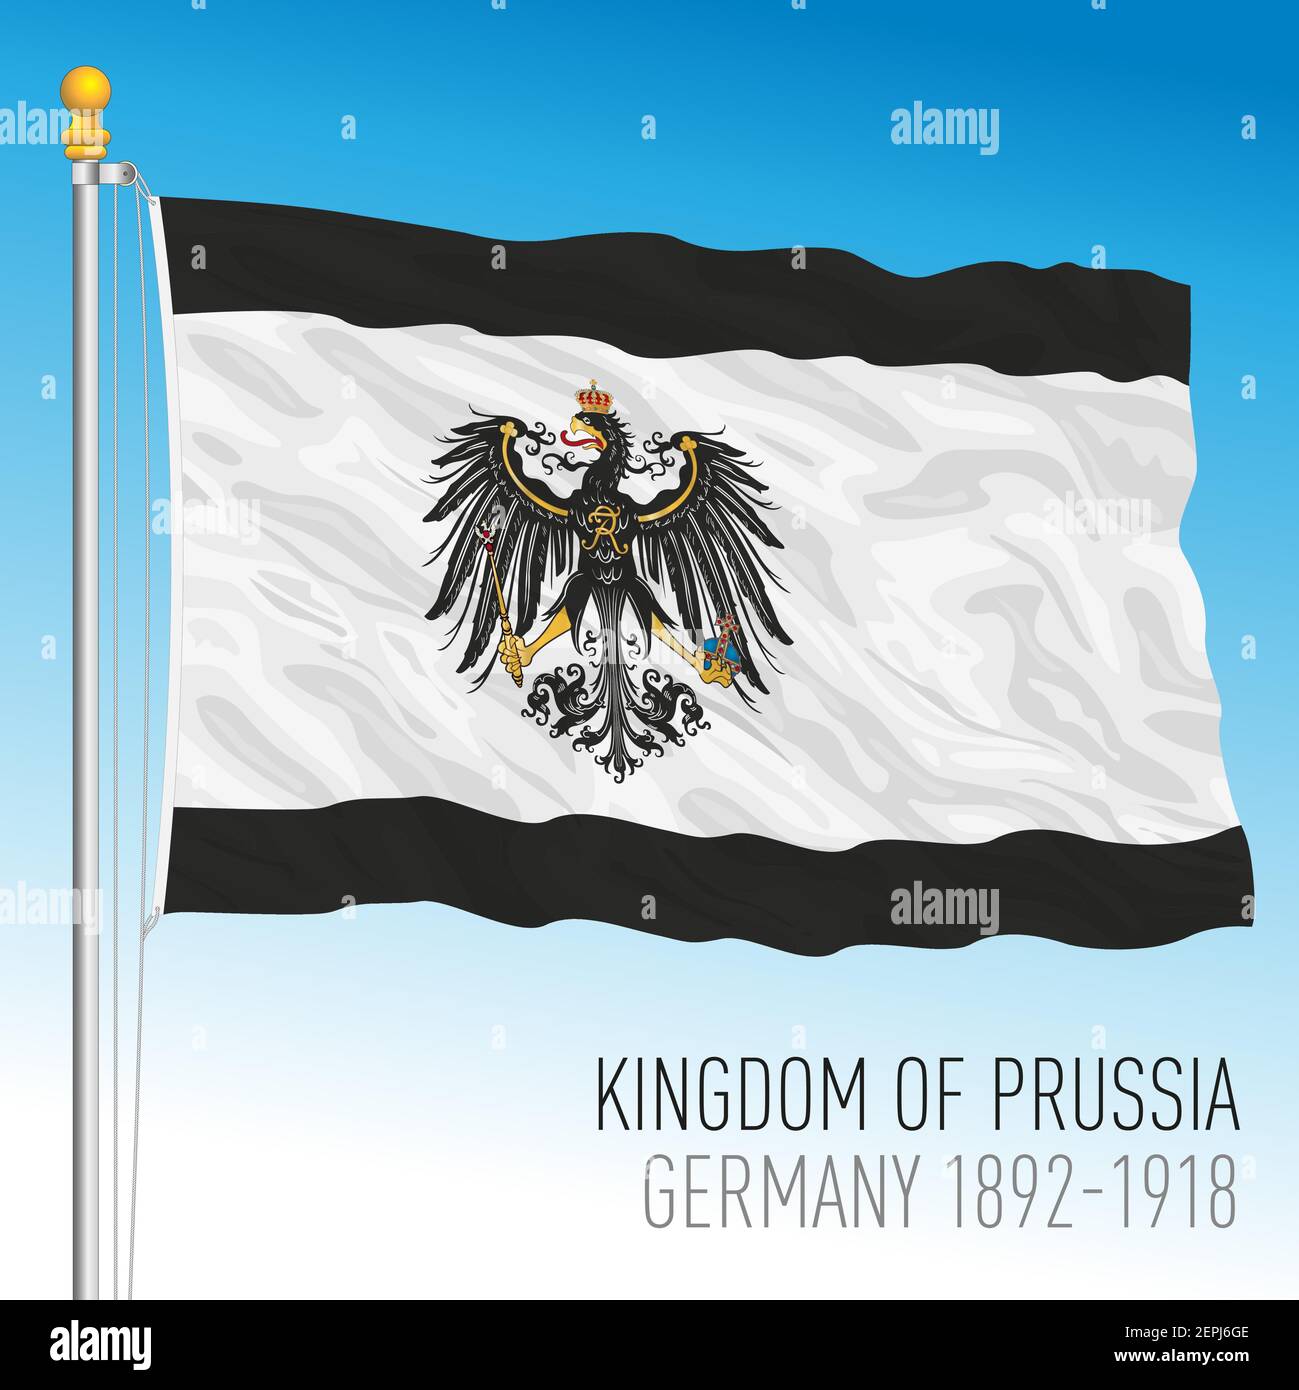 Kingdom of Prussia historical flag, 1892 - 1918, Germany, europe, vector illustration Stock Vector